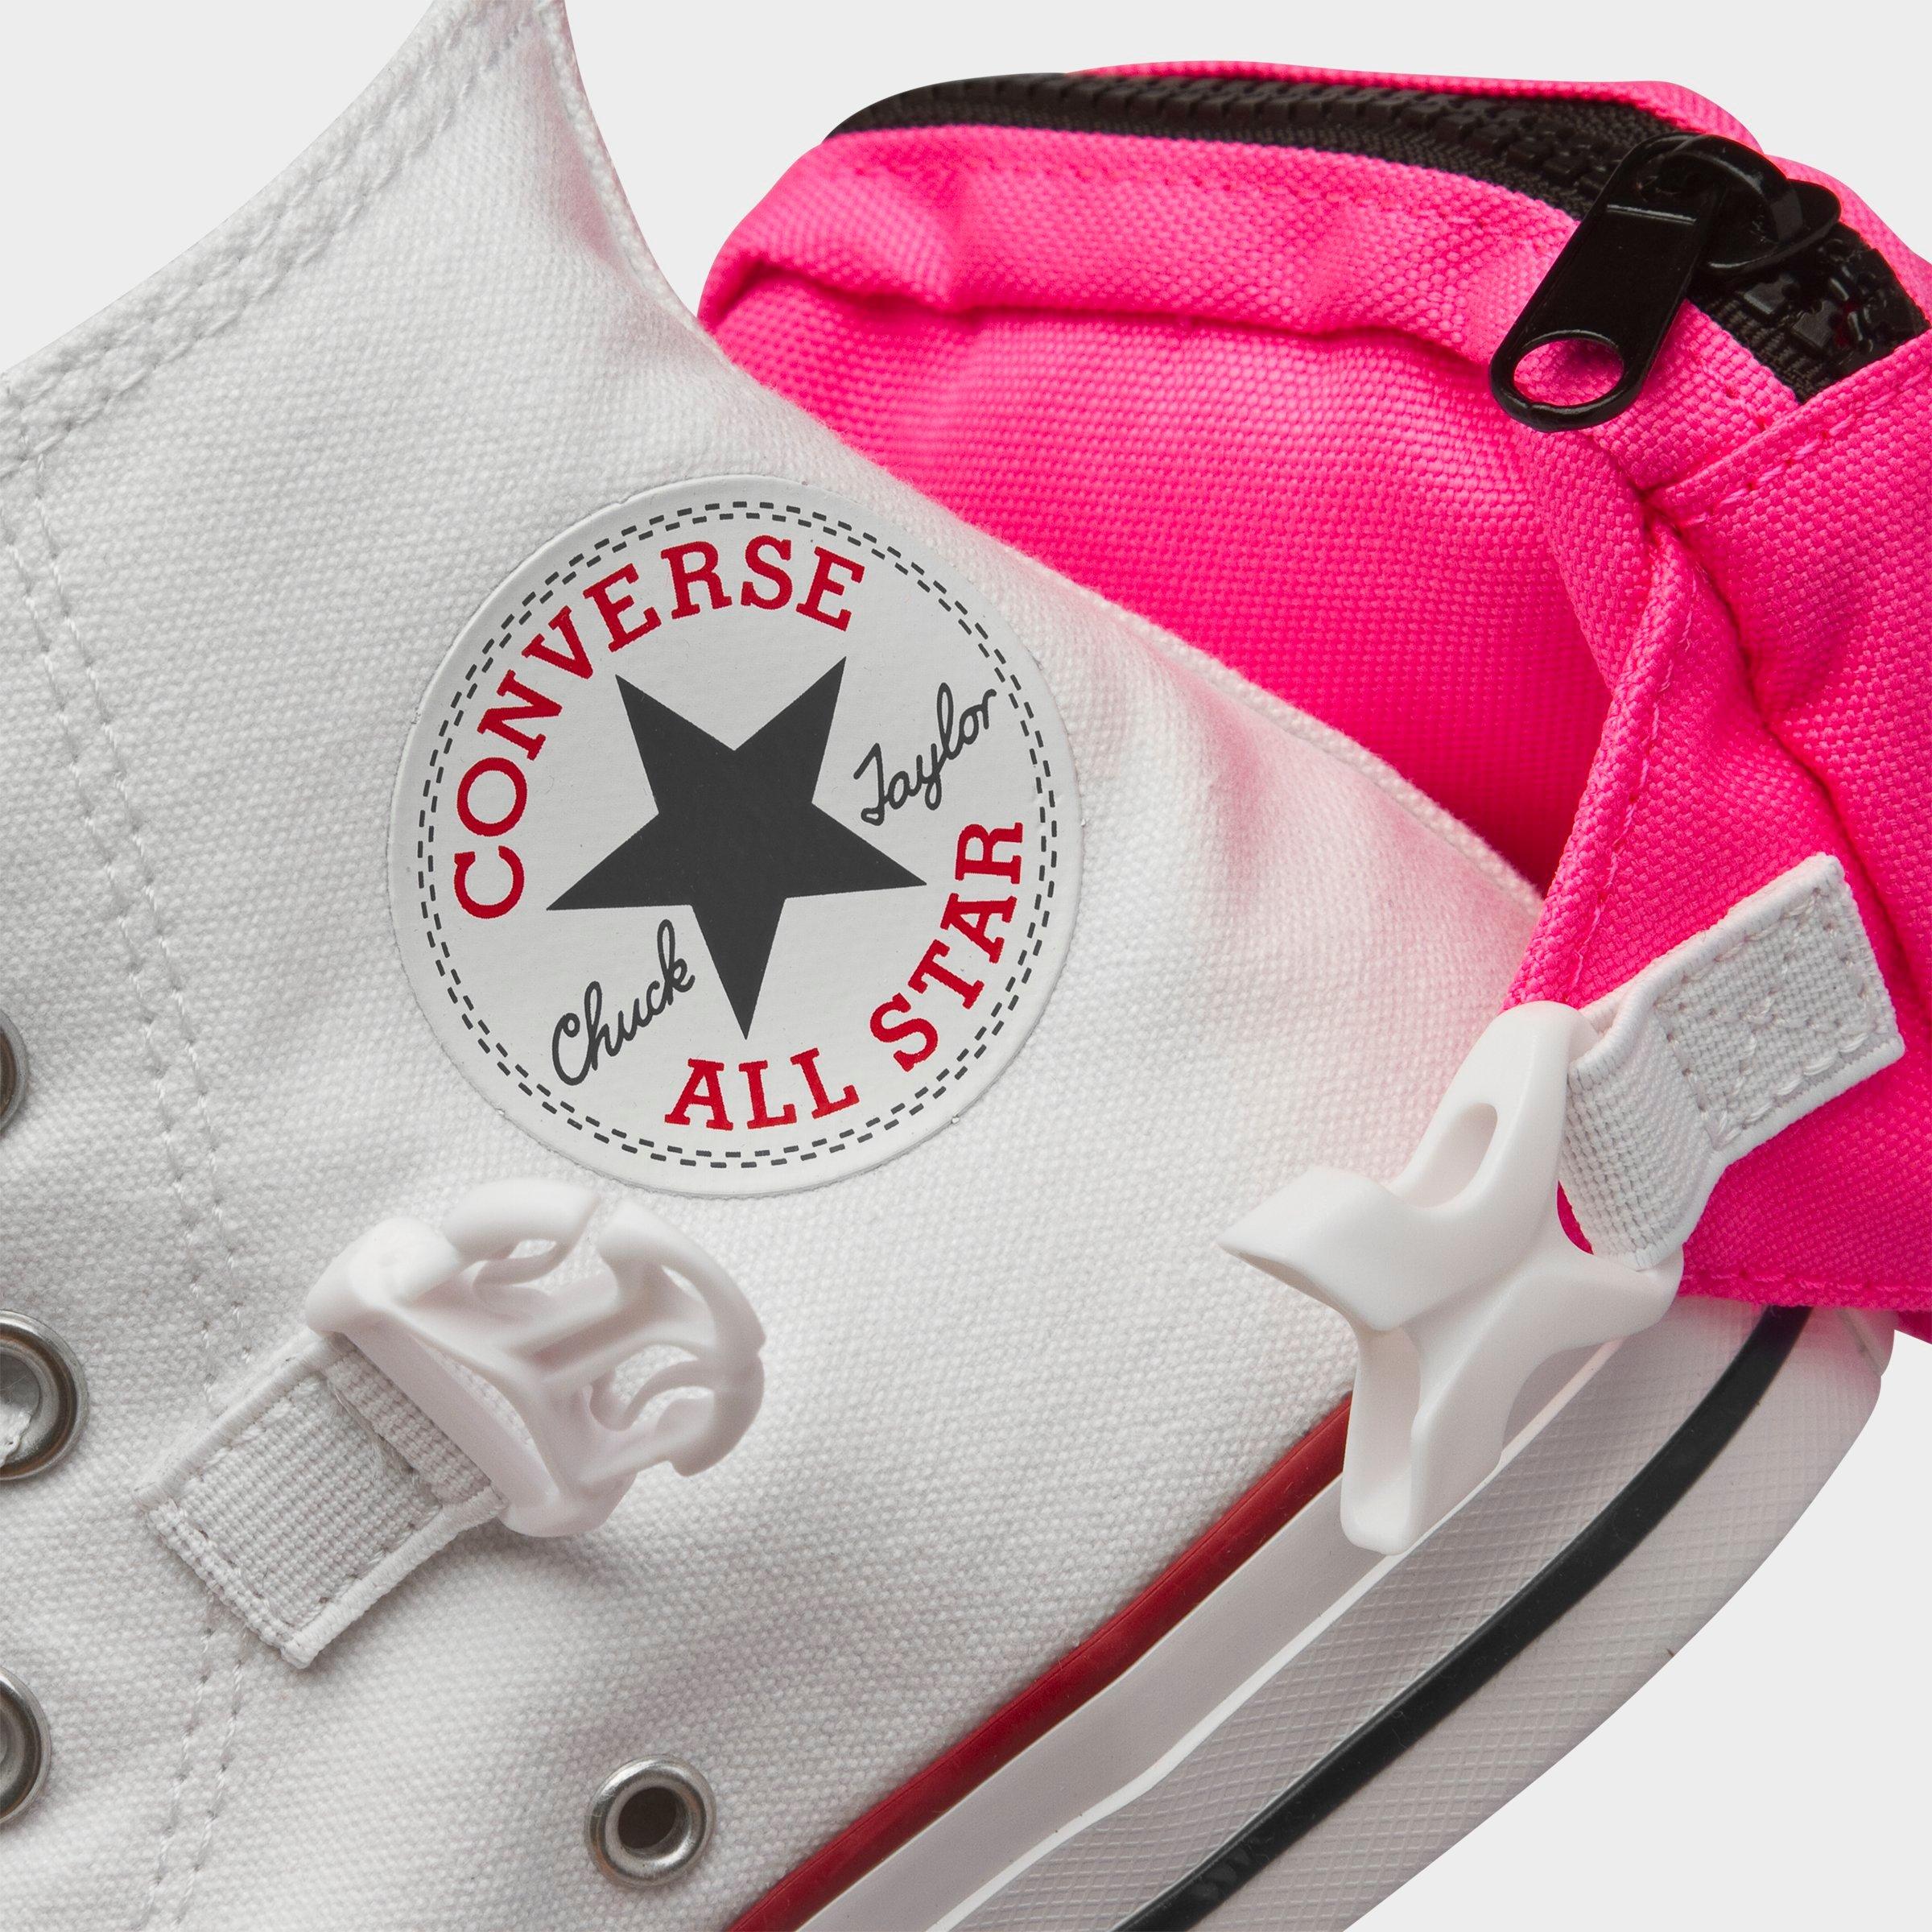 converse backpack shoes